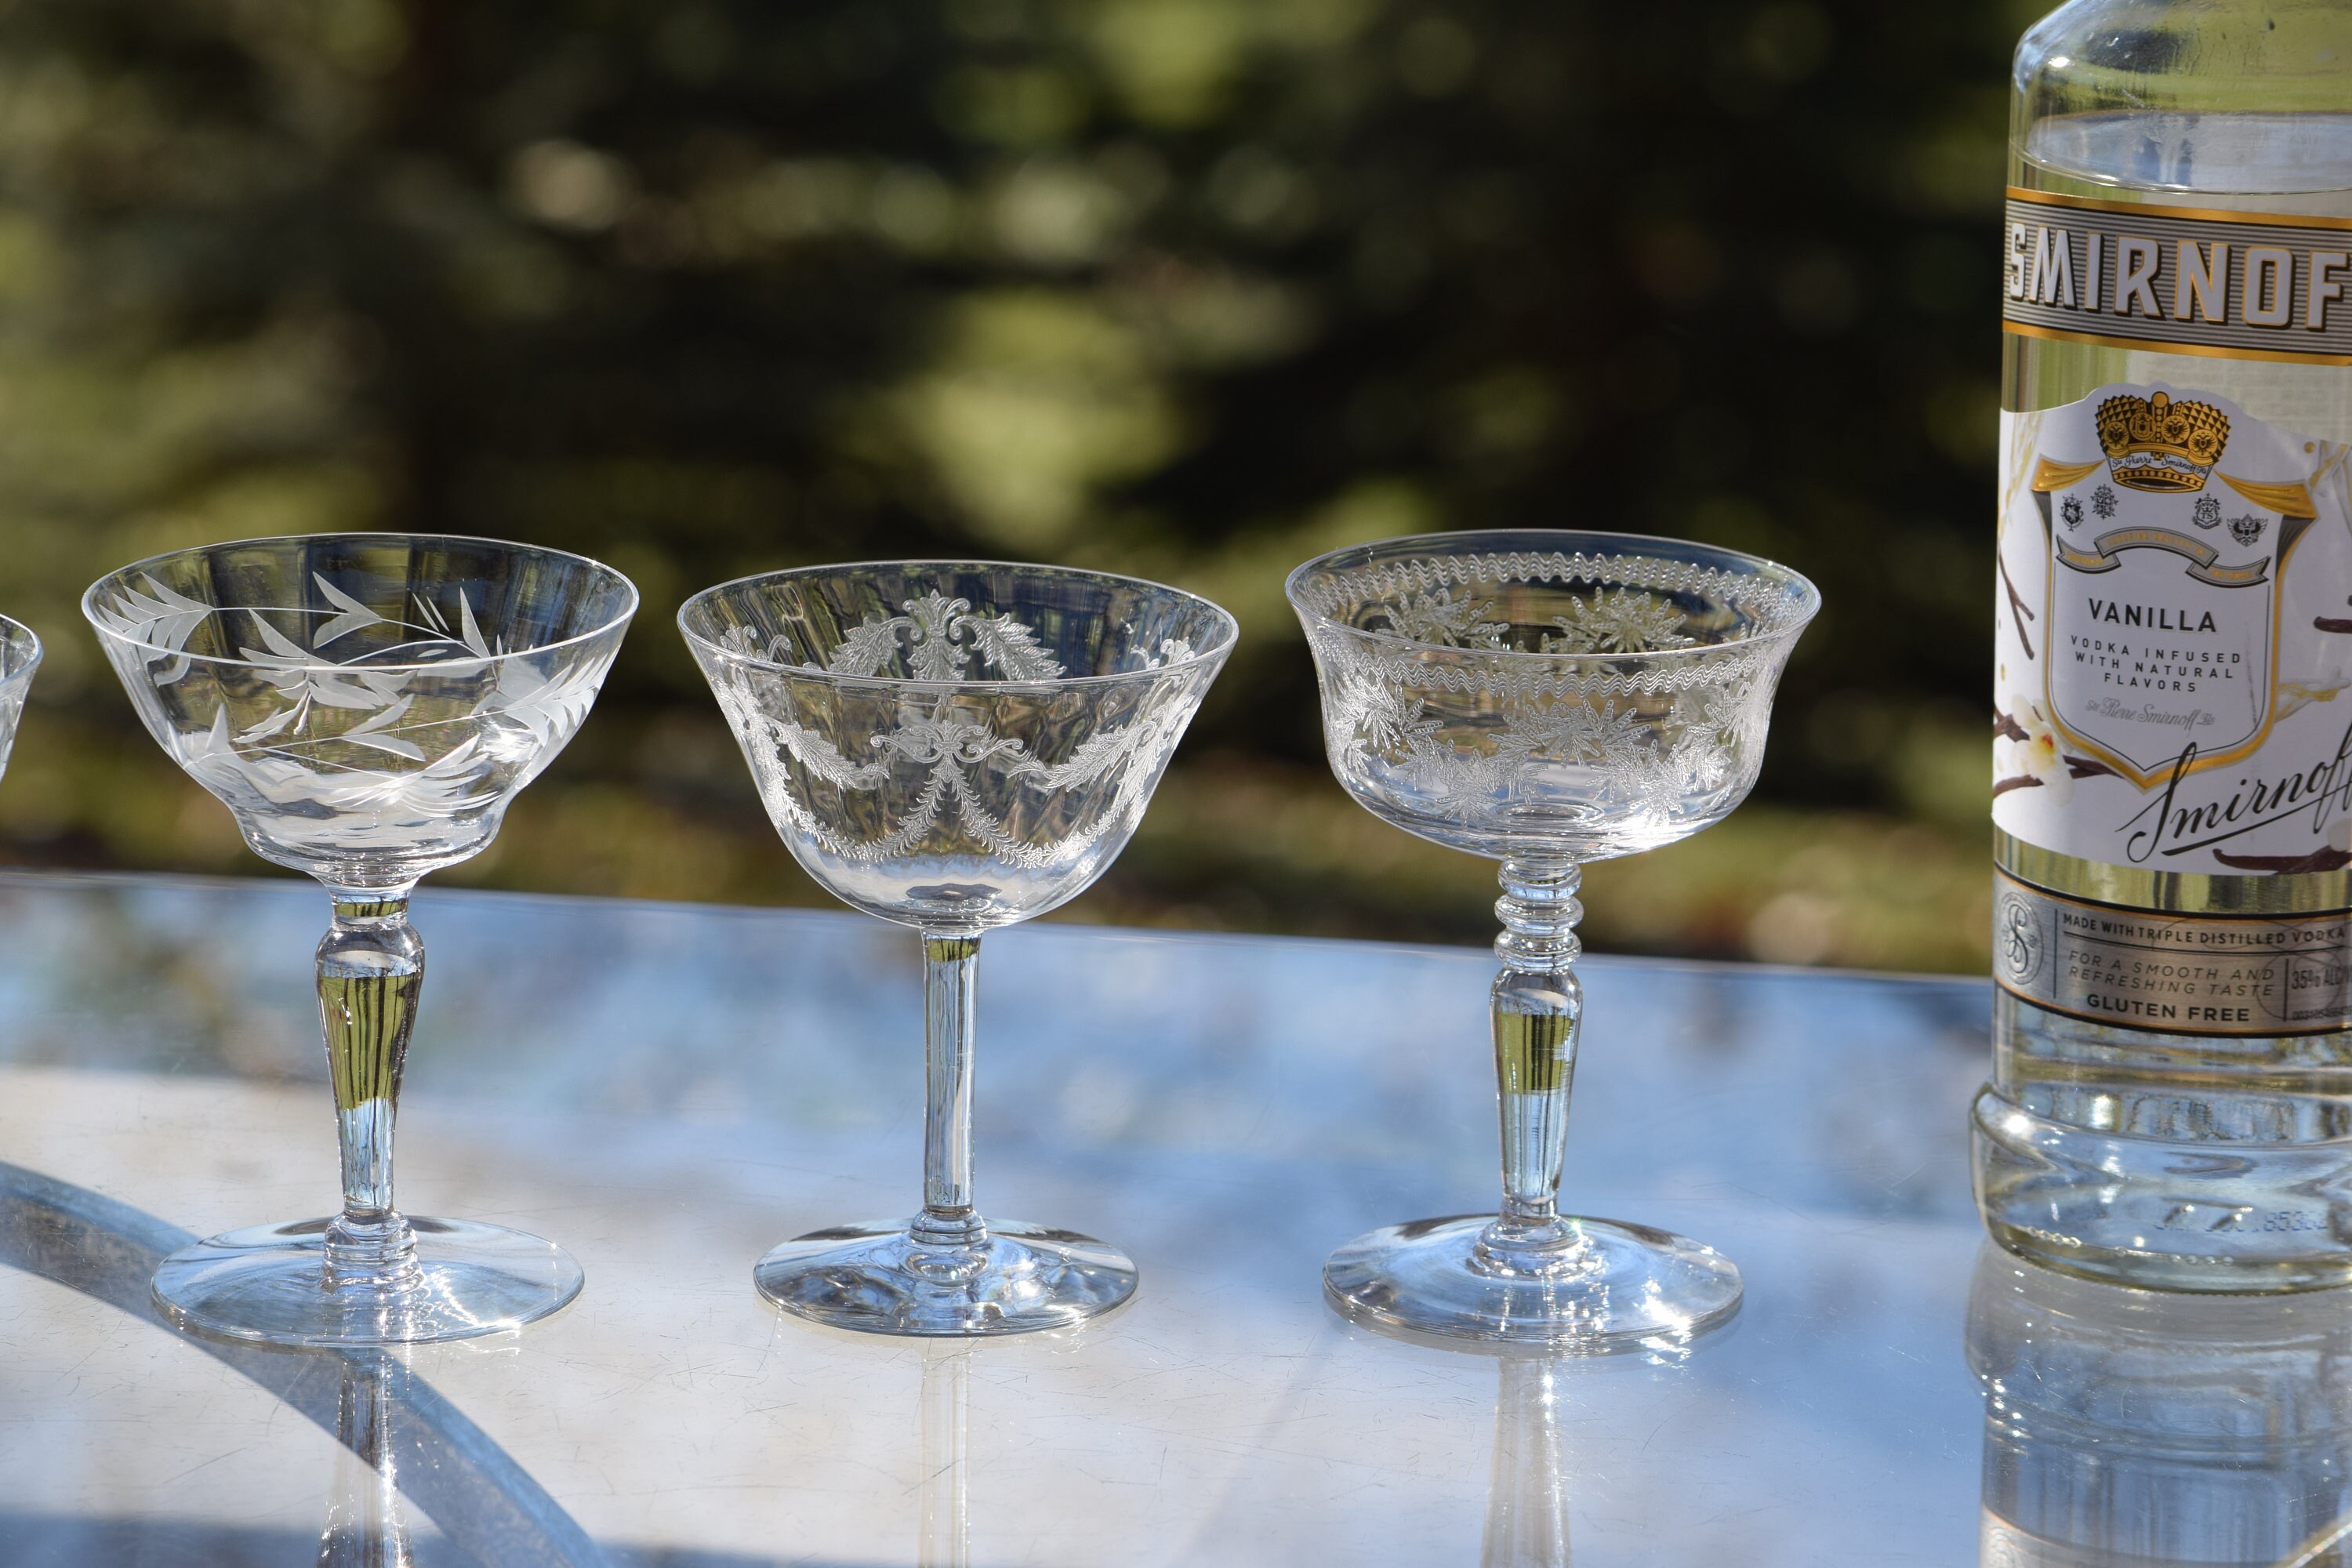 4 Vintage Etched Cocktail Martini Glasses, Set of 4 Mis-matched Mixed Cocktail  Glasses, Nick and Nora, Vintage Champagne Glasses 